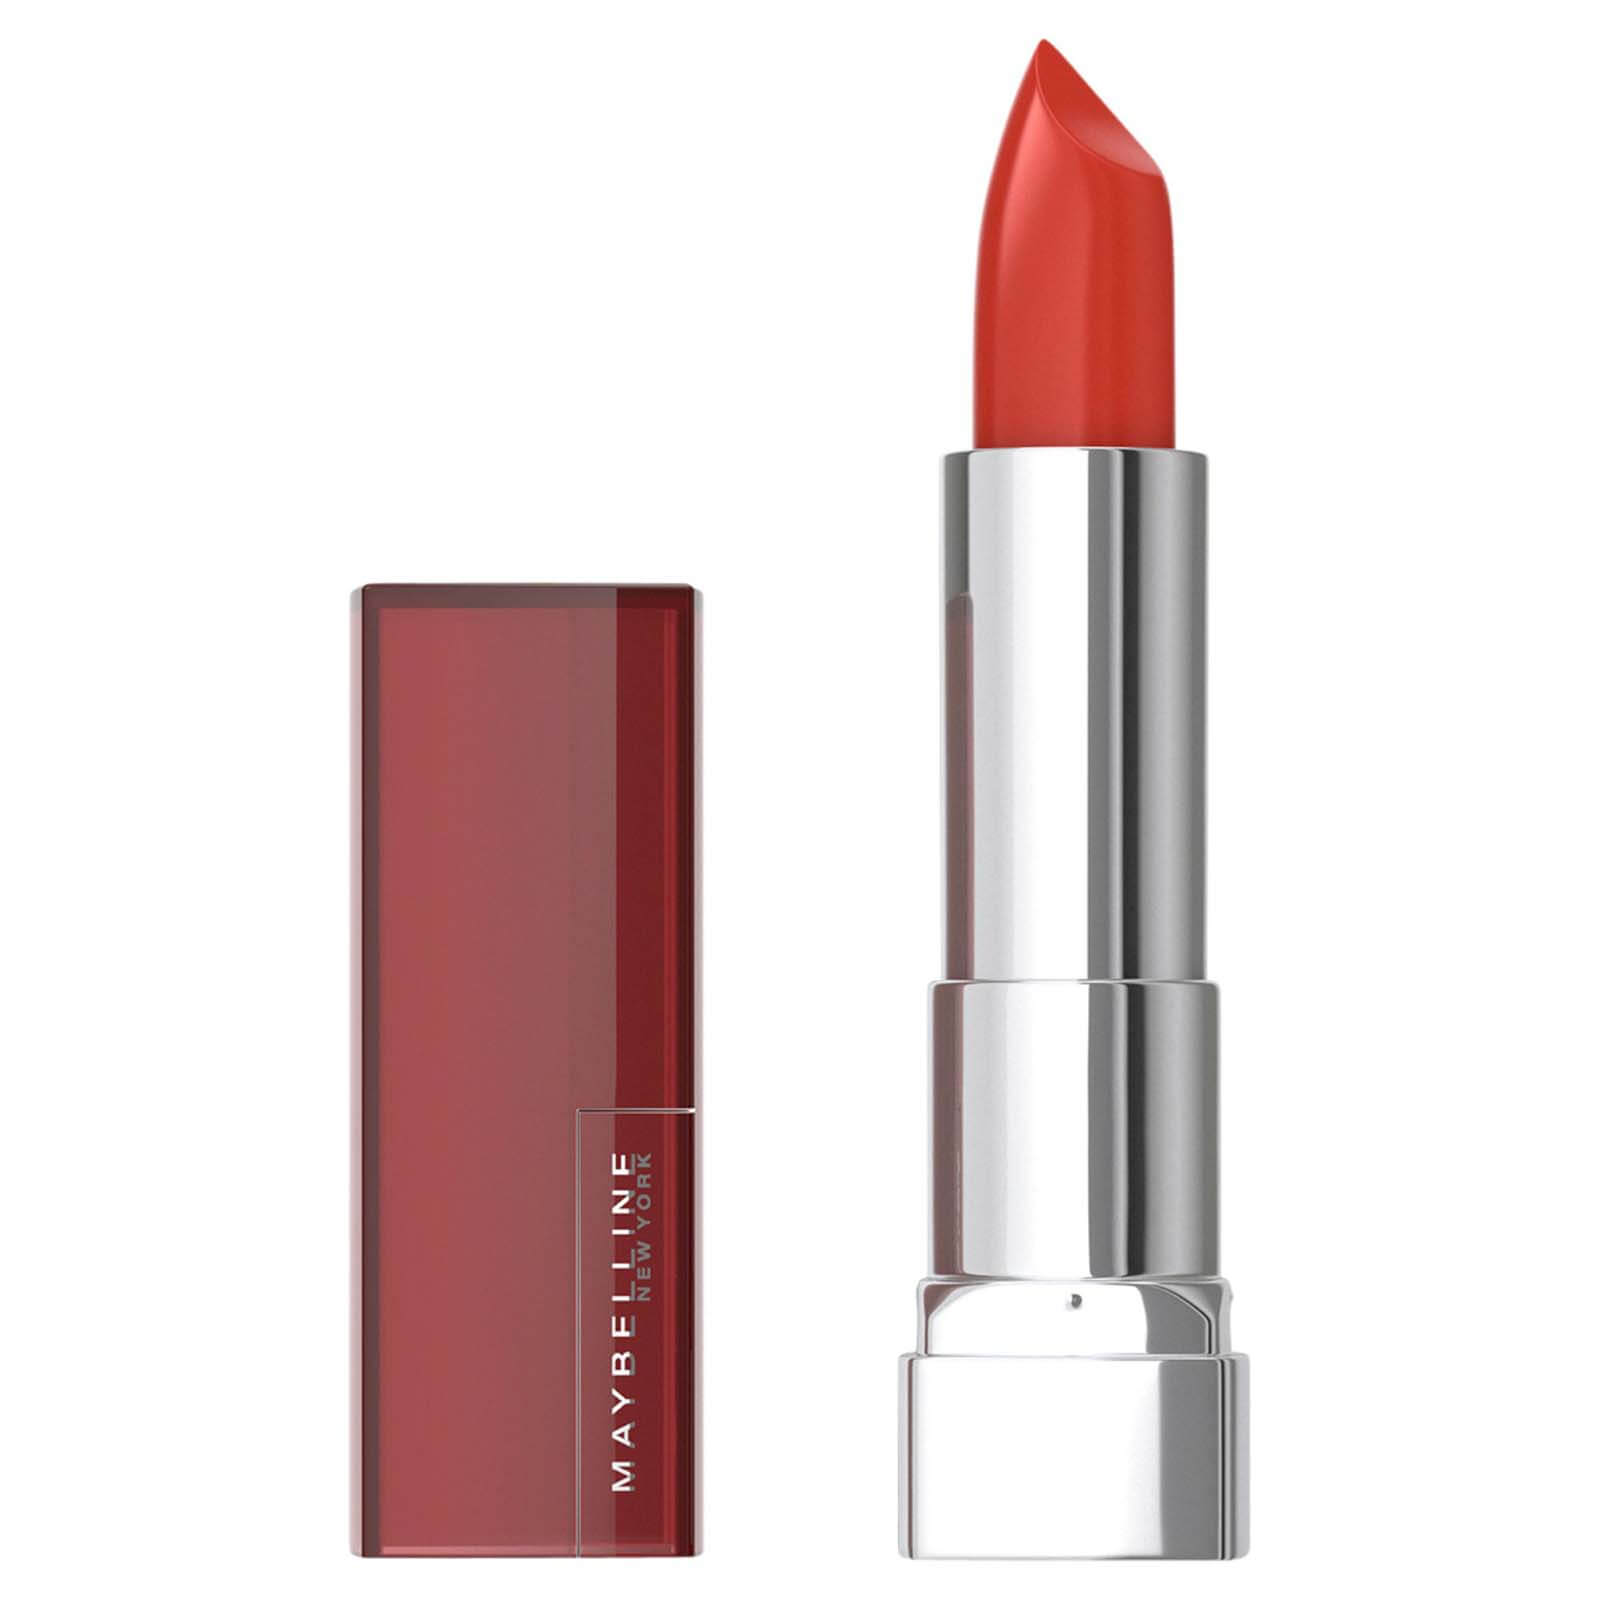 Maybelline Color Sensational The Creams Lipstick 4.2g (Various Shades) - Coral Rise 344